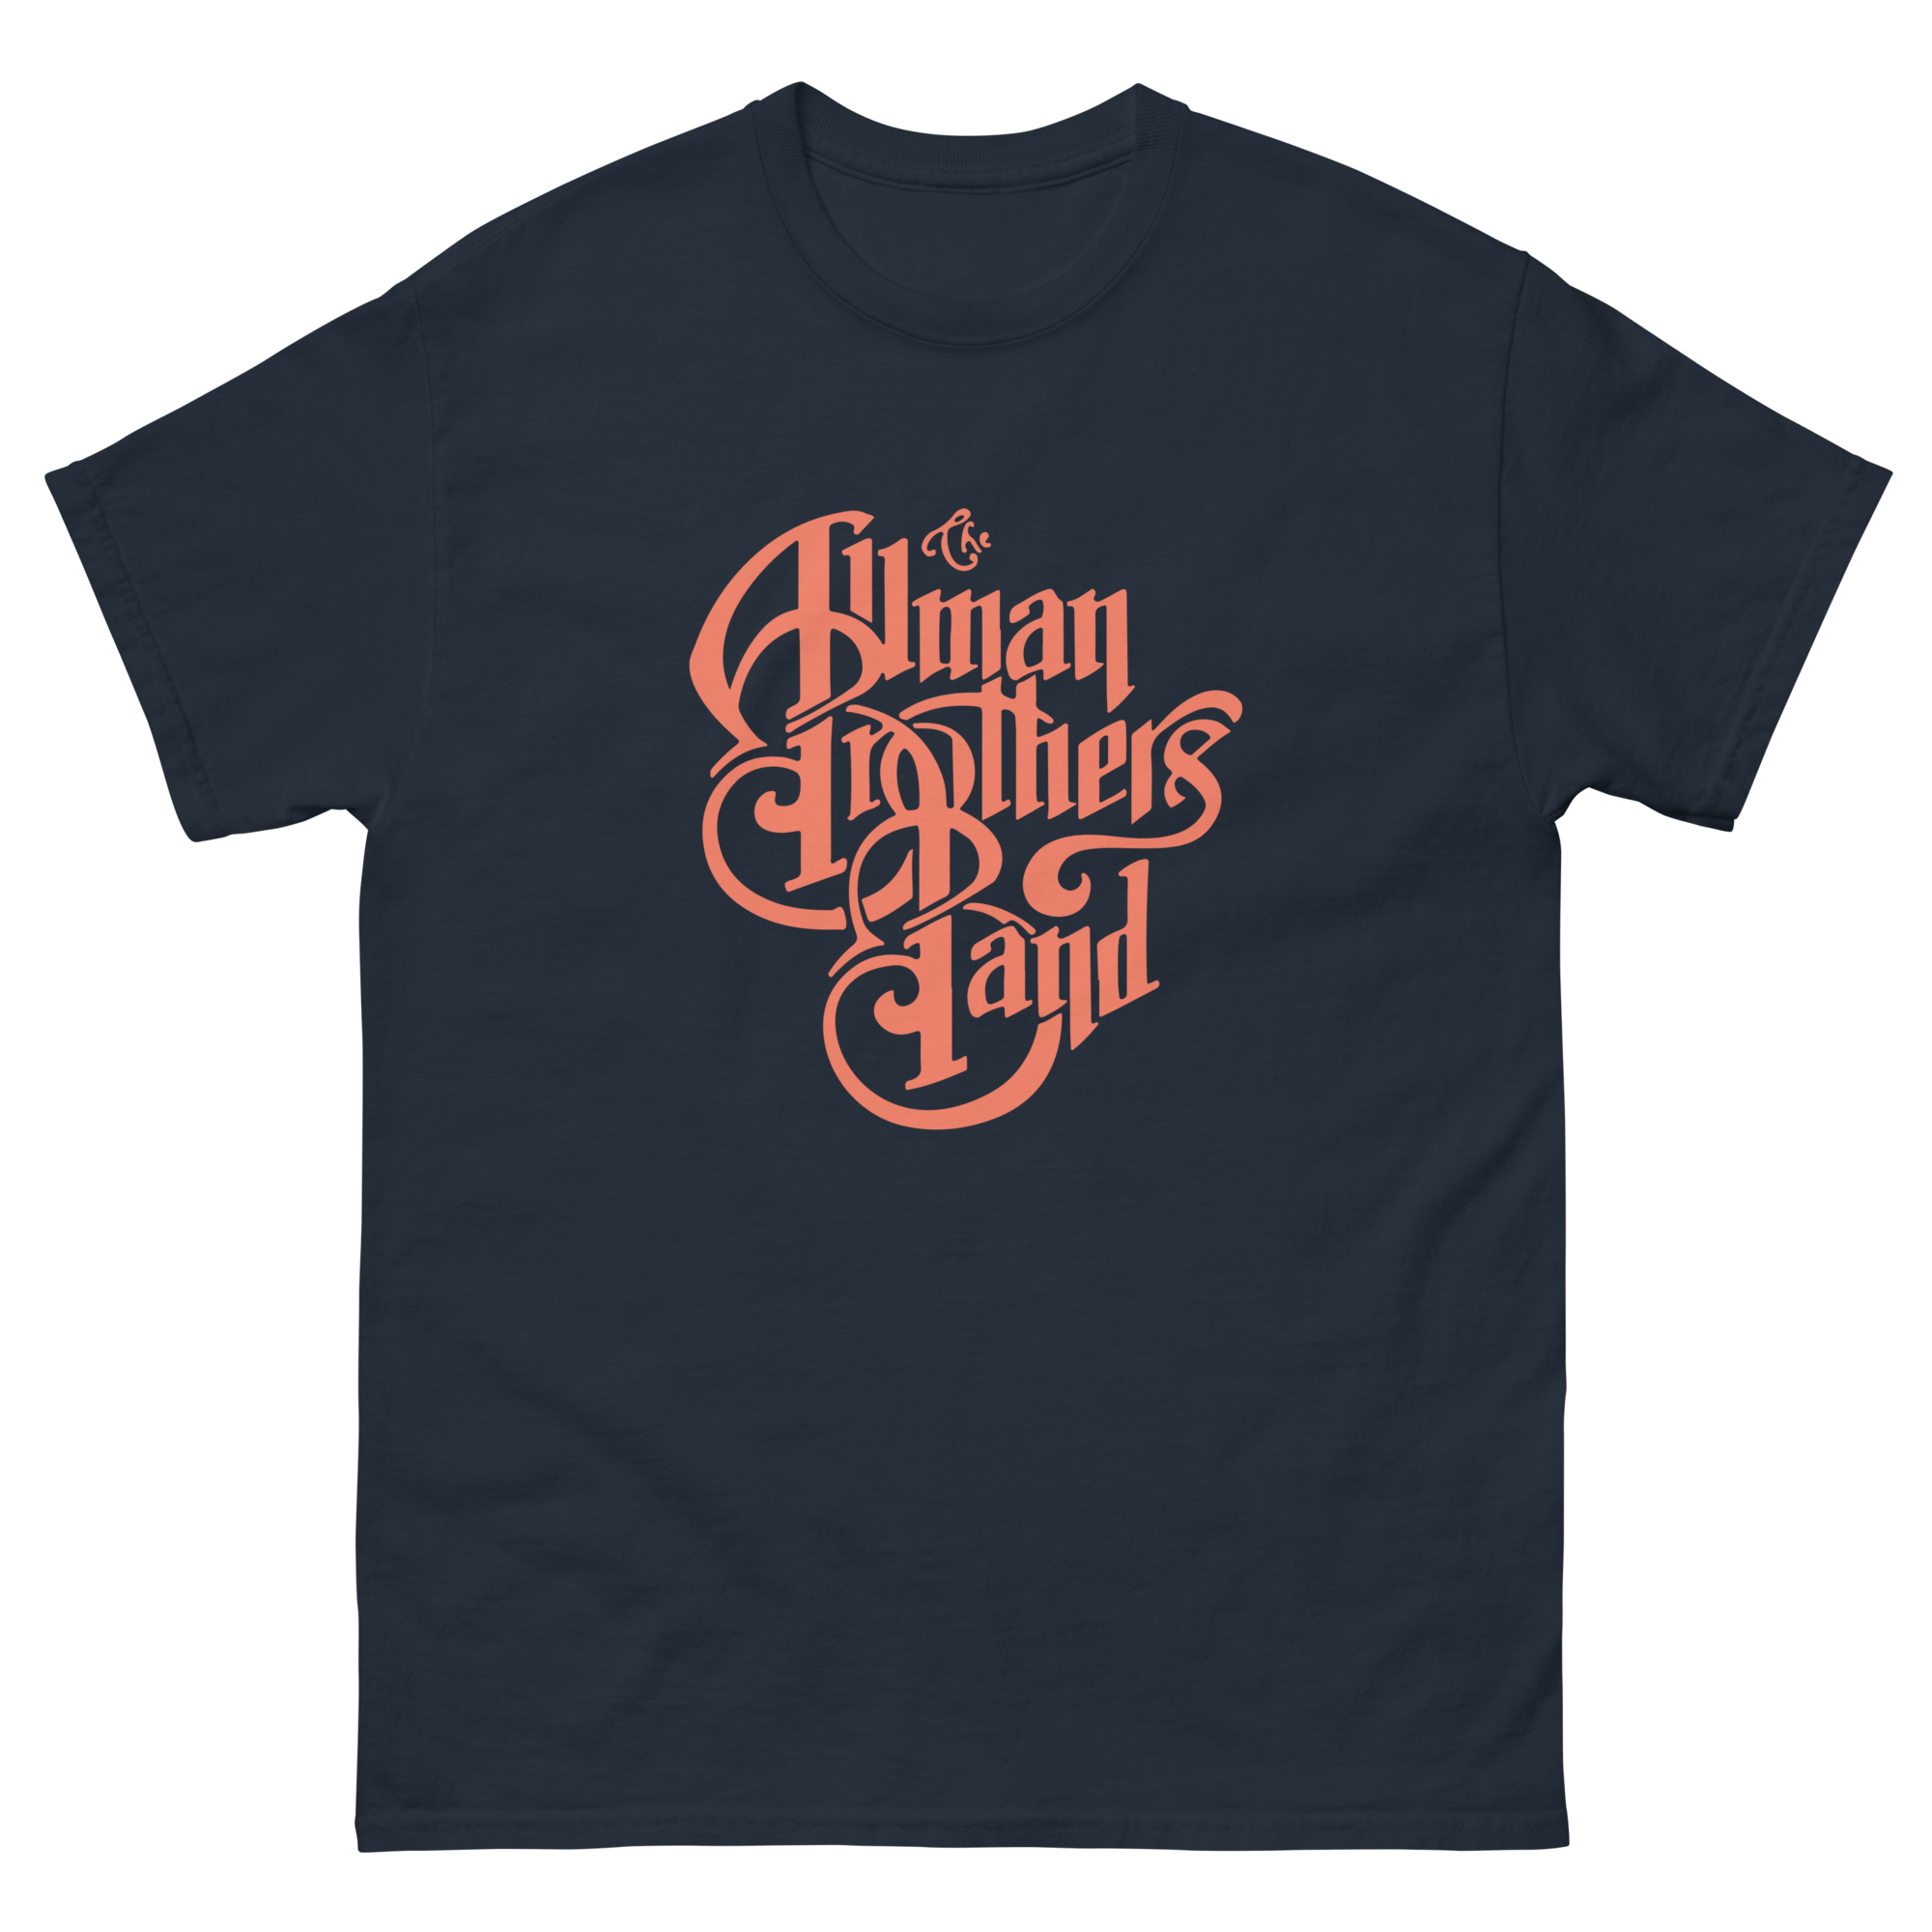 The Allman Brothers Eco T-Shirt  Band Logo Orange in Navy - Section 119